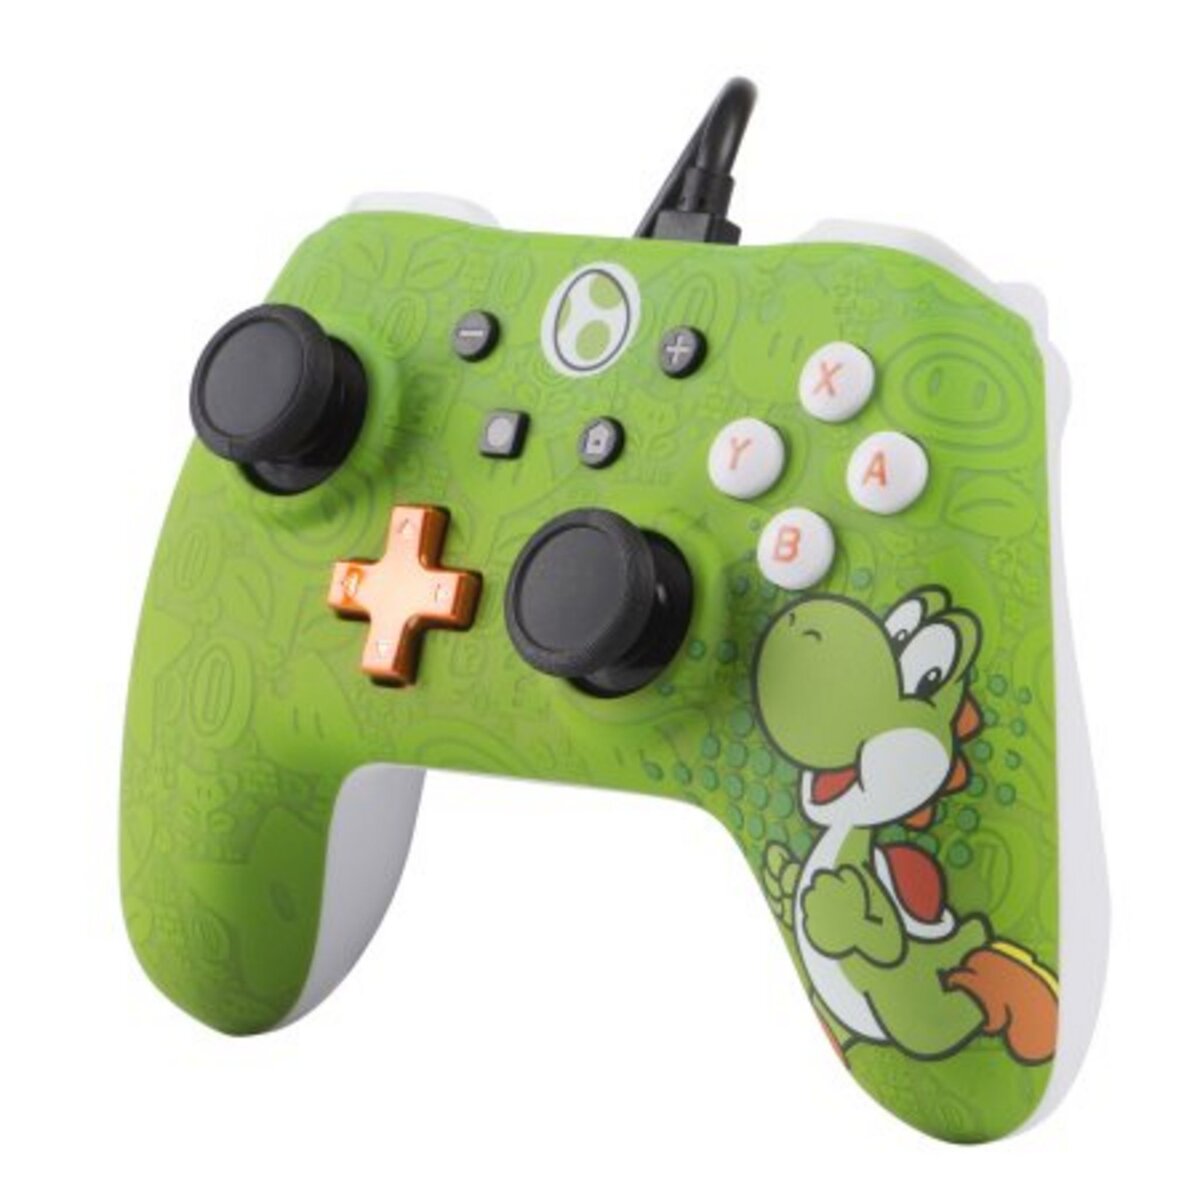 MANETTE FILAIRE YOSHI SWITCH